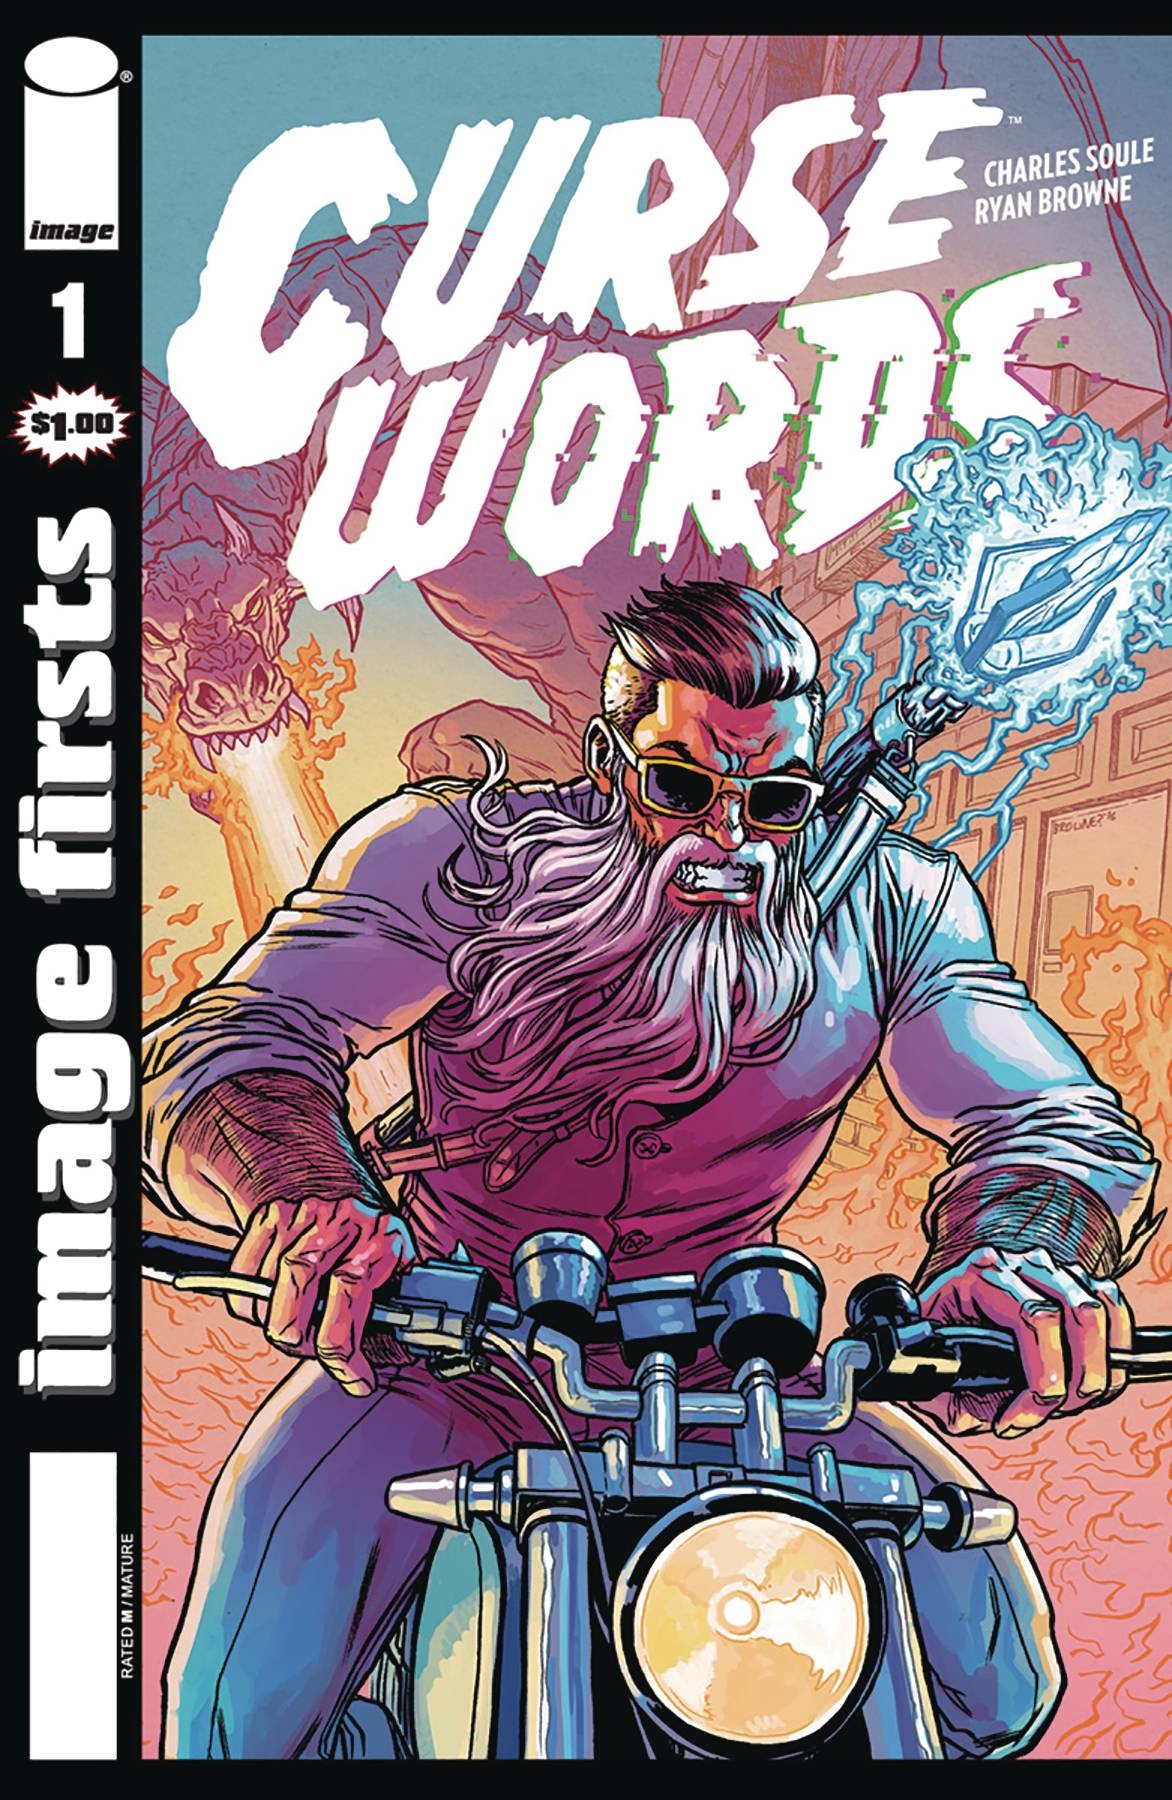 Image Firsts Curse Words #1 Volume 29 (Mature)